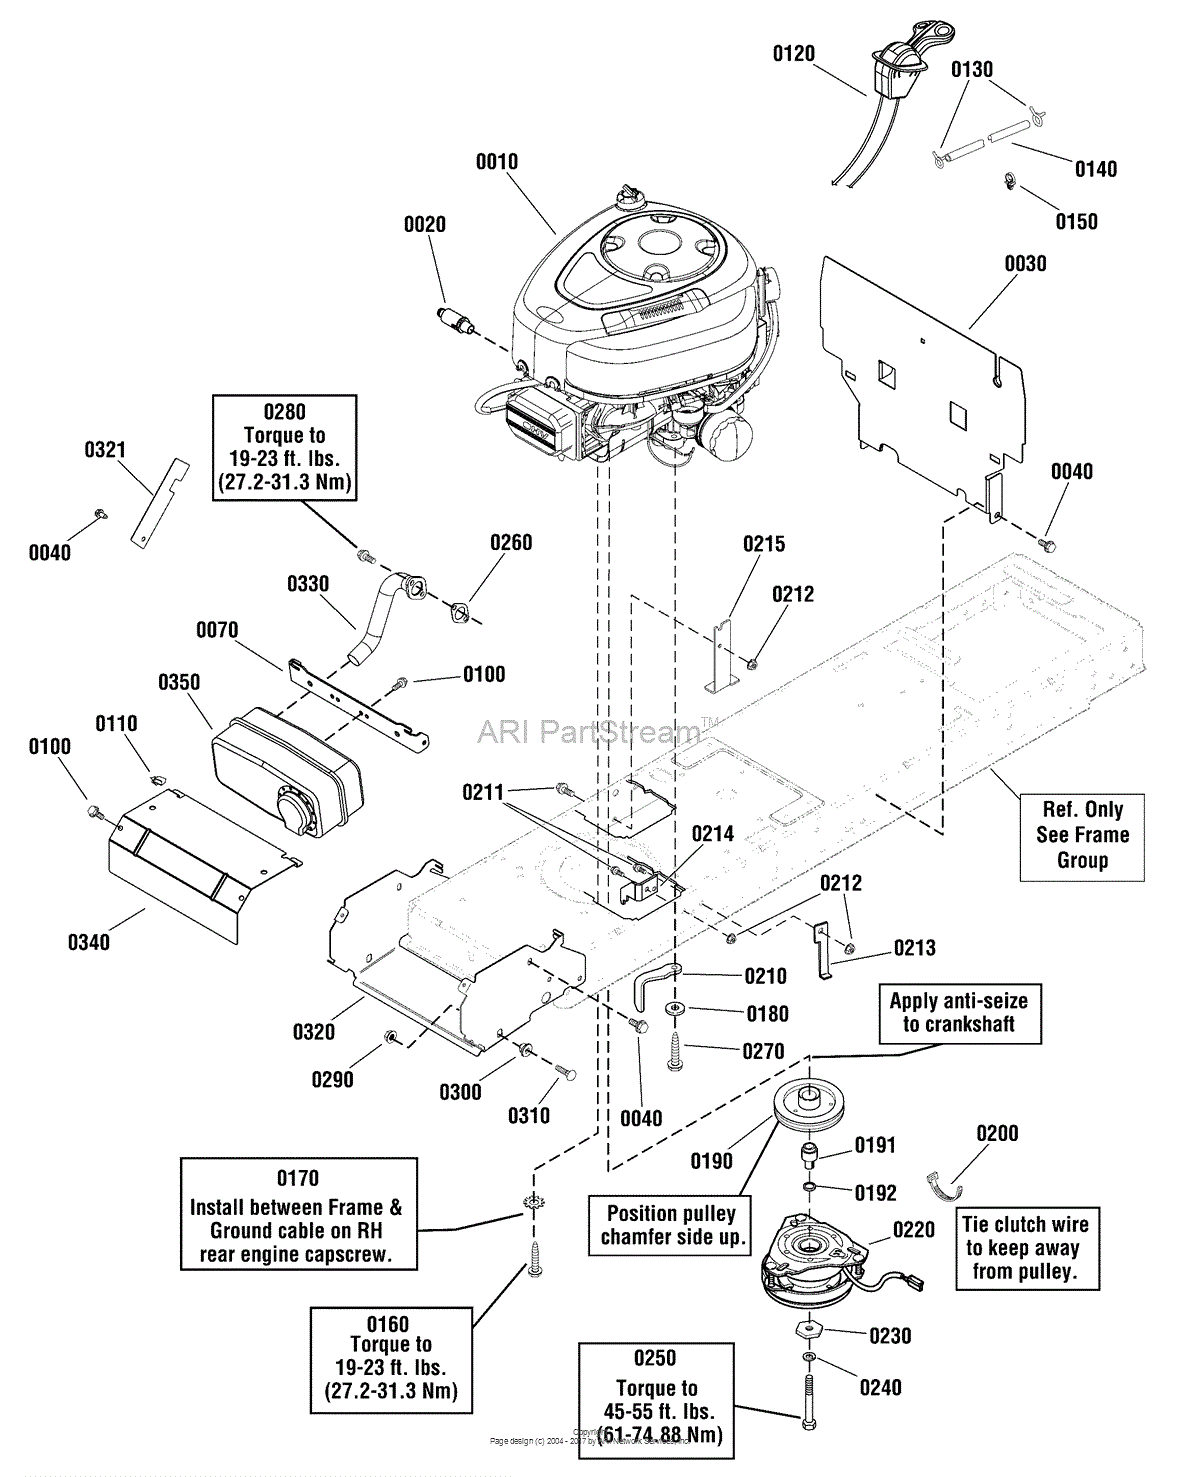 Murray 2691396-00 - MSD100, 17.5 Gross HP 42" Murray Lawn Tractor (Export) (2017) Parts Diagram